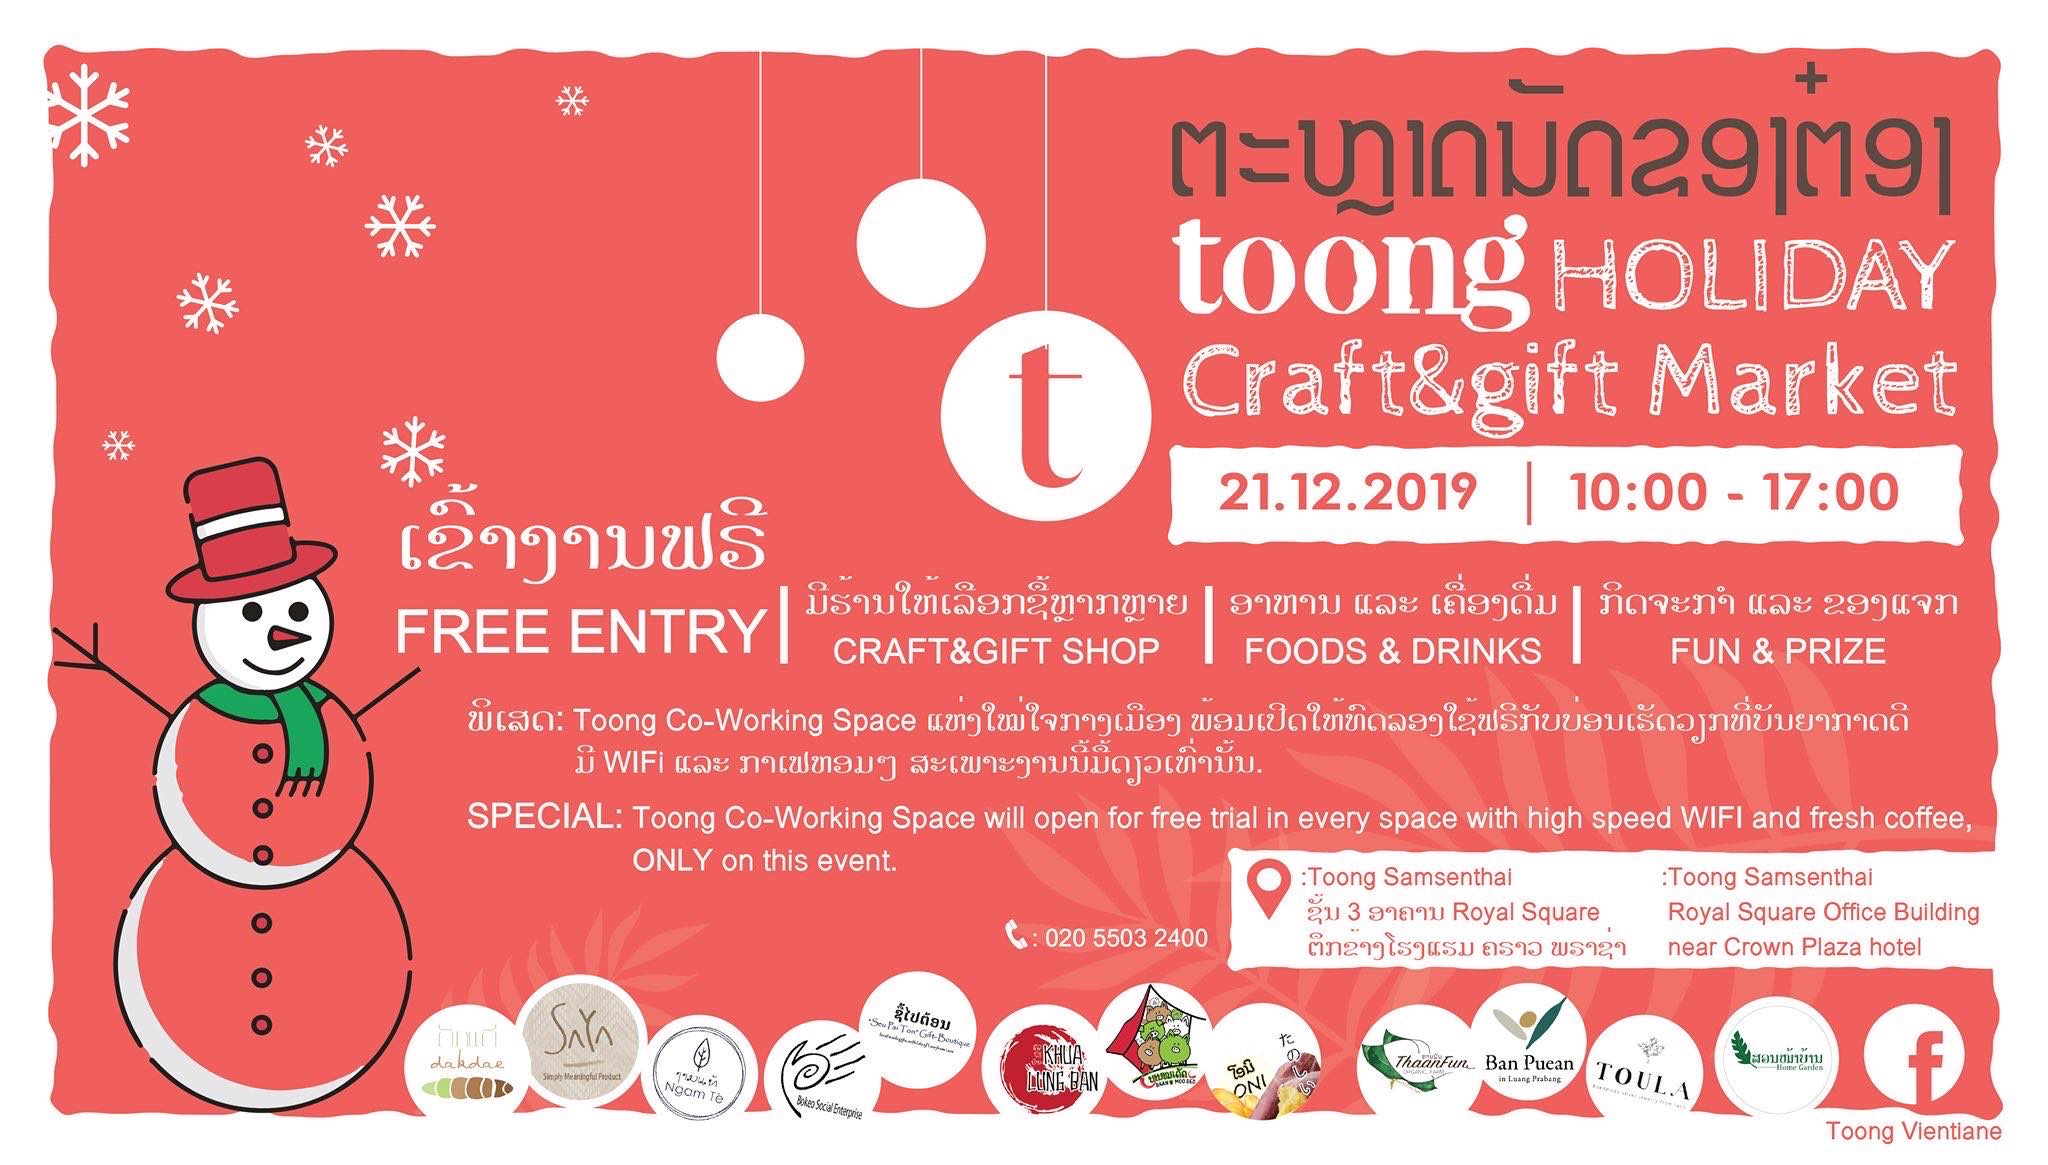 Toong Holiday Craft & Gift Market